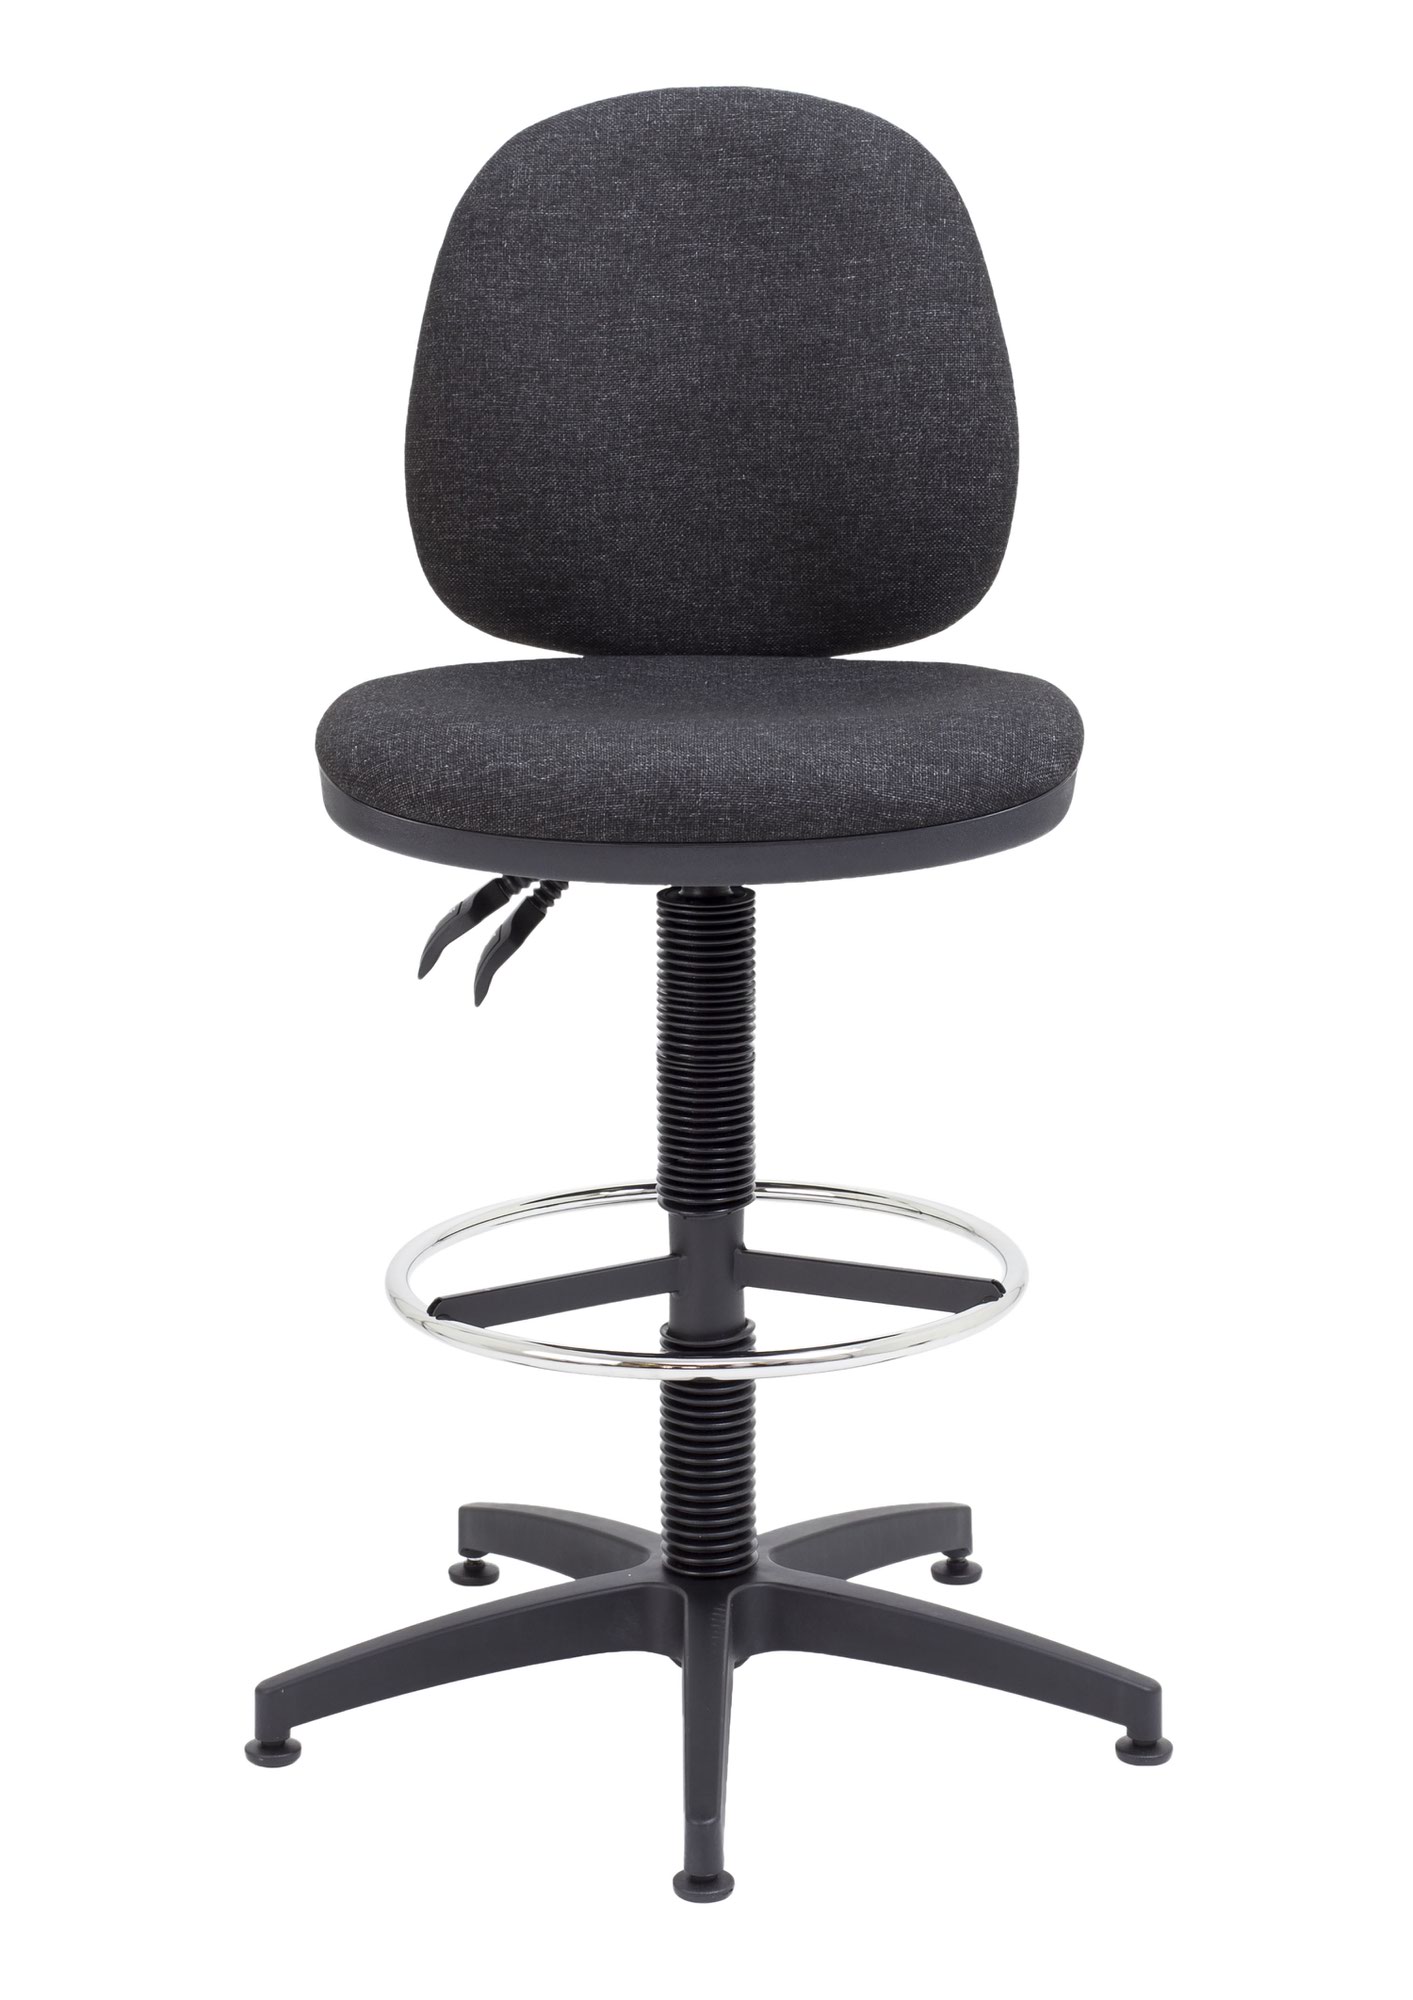 TC office concept MB chair in Charcoal 